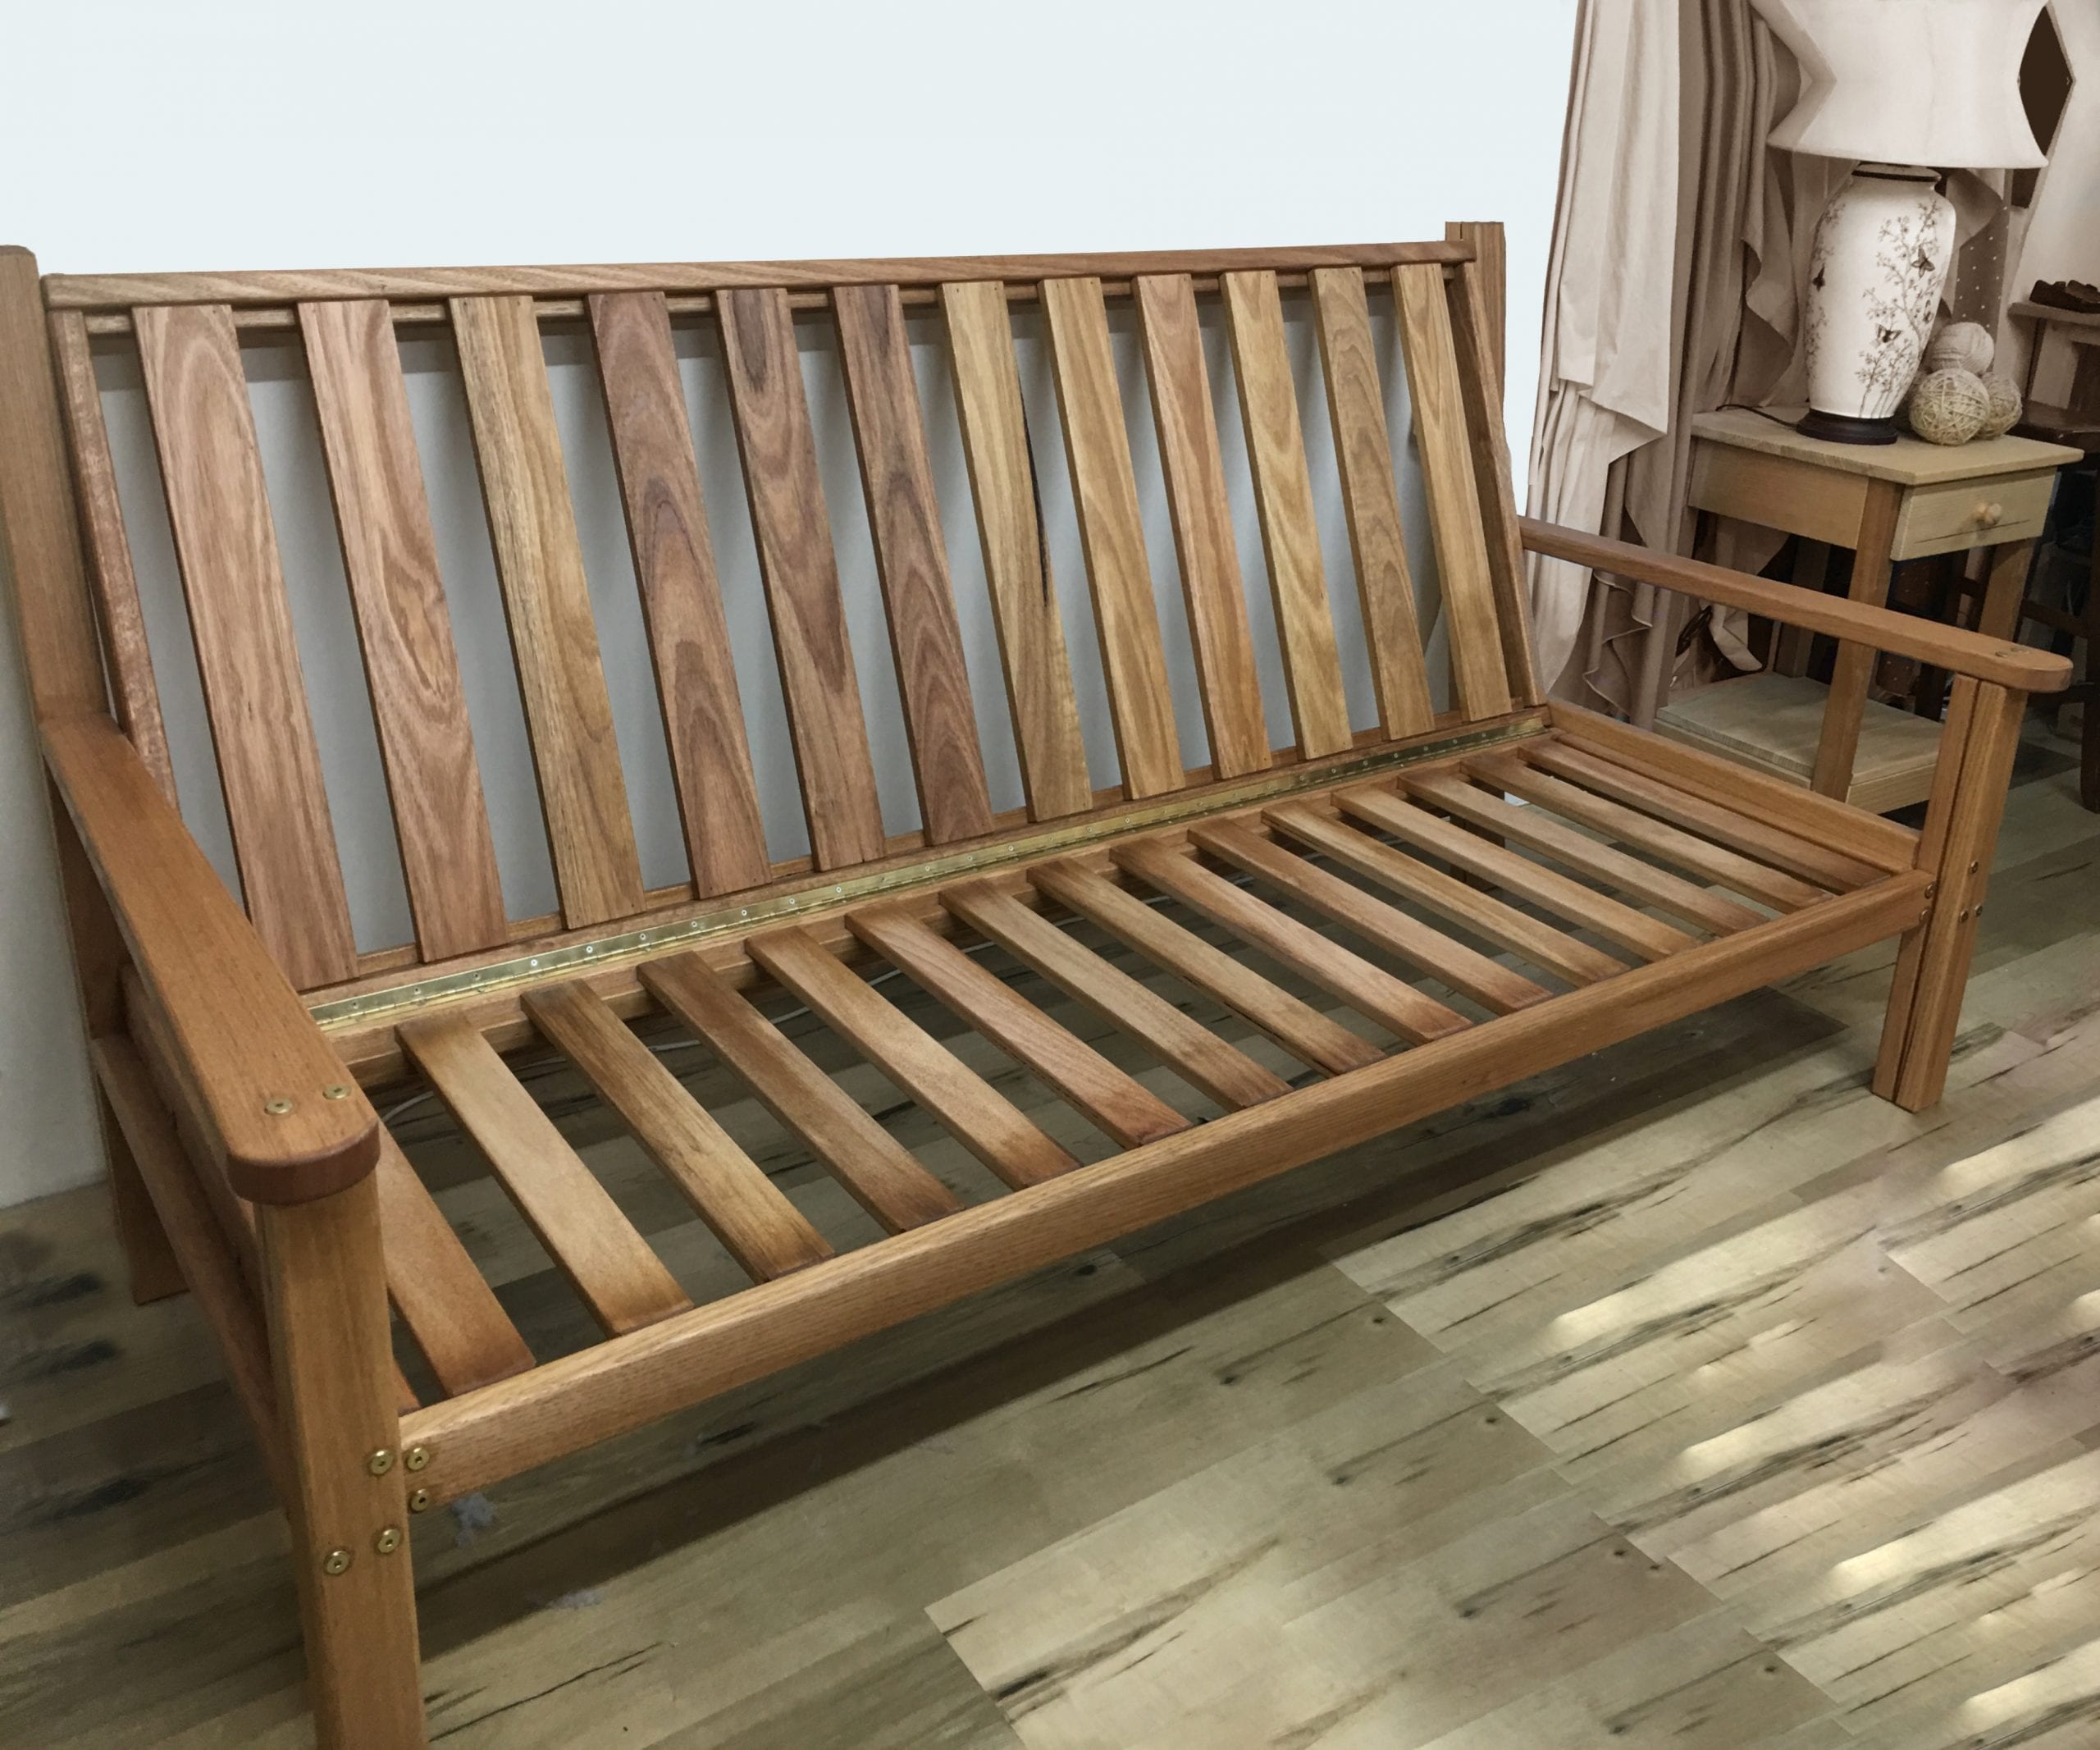 sofa style bed frame